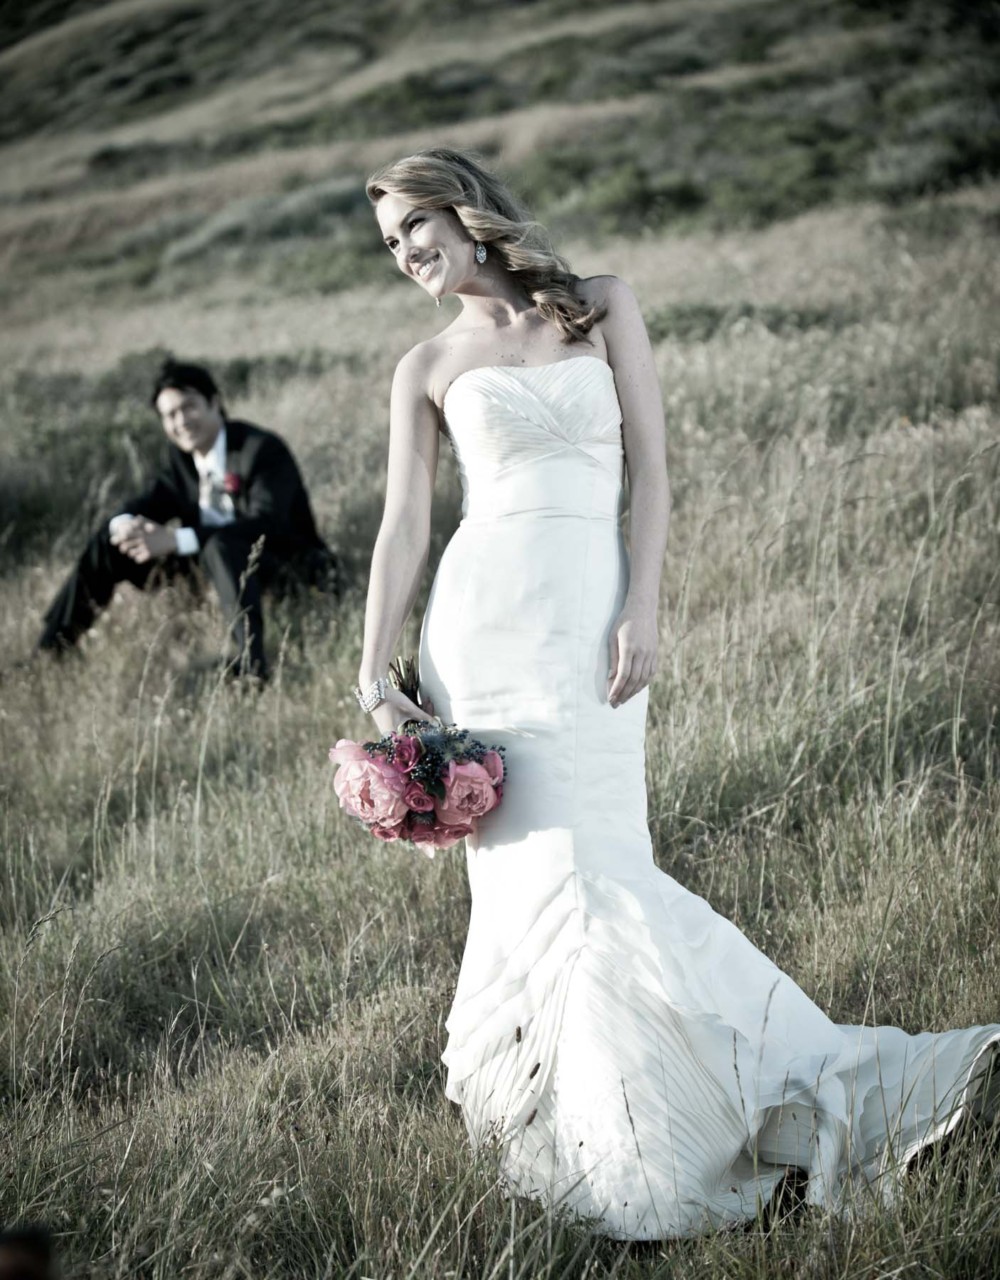 Looking for a local wedding photographer in Girdwood?